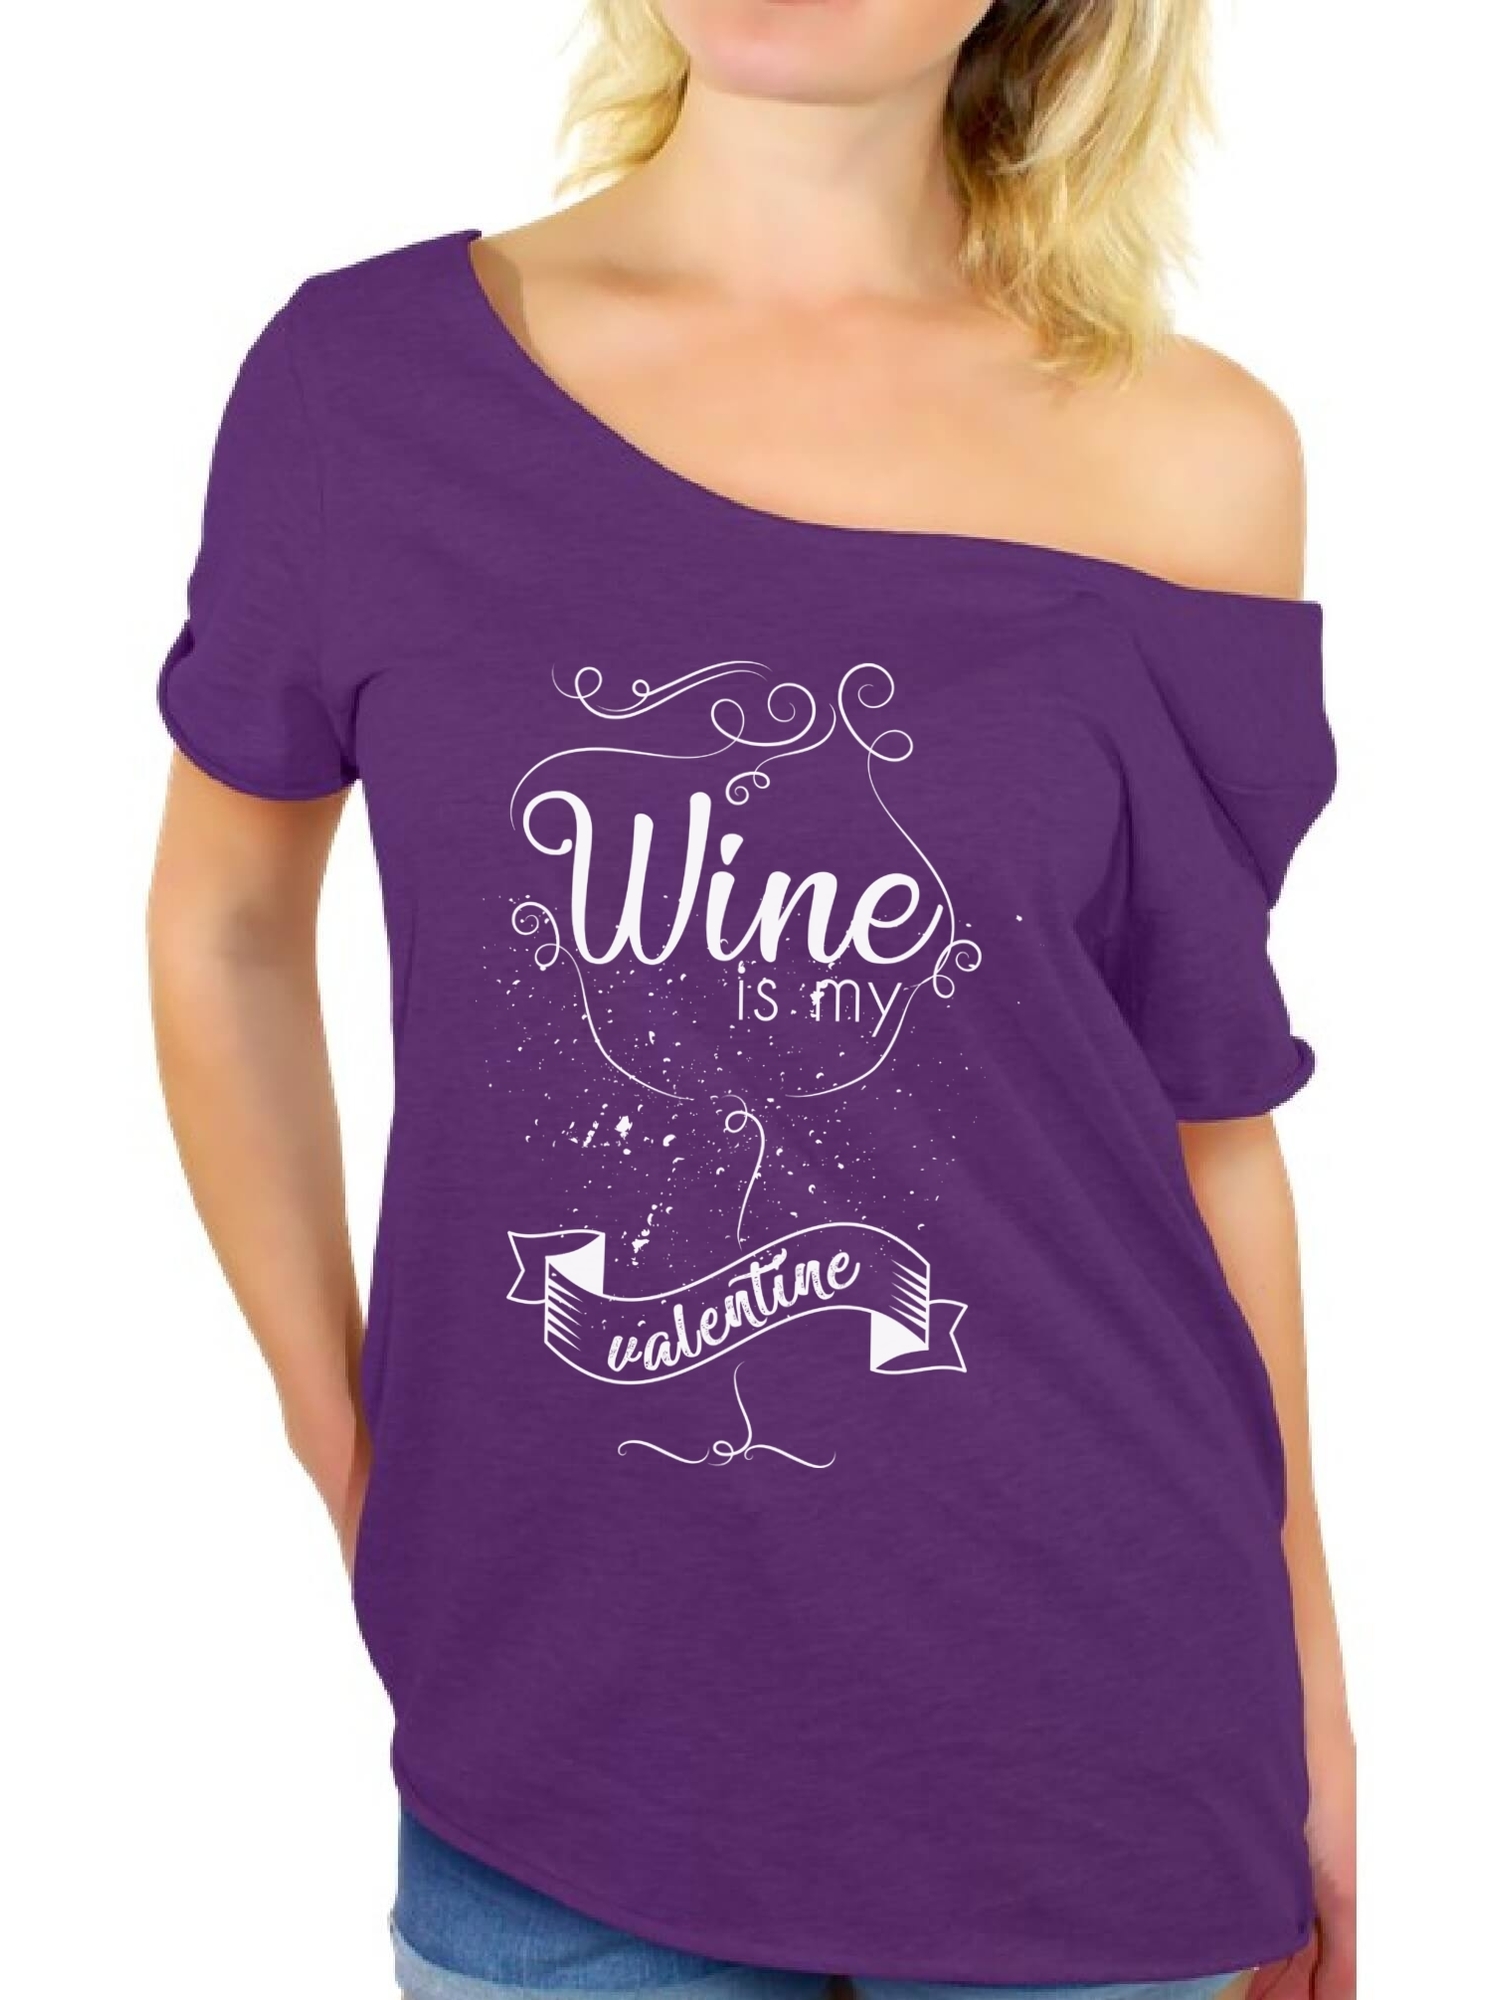 Awkward Styles Wine Is My Valentine Shirt Wine Is My Valentine Off The Shoulder T Shirt Valentines Day Shirt Wine Lover Off Shoulder Top for Women Valentine's Day Gift for Her Wine Party Outfit - image 1 of 4